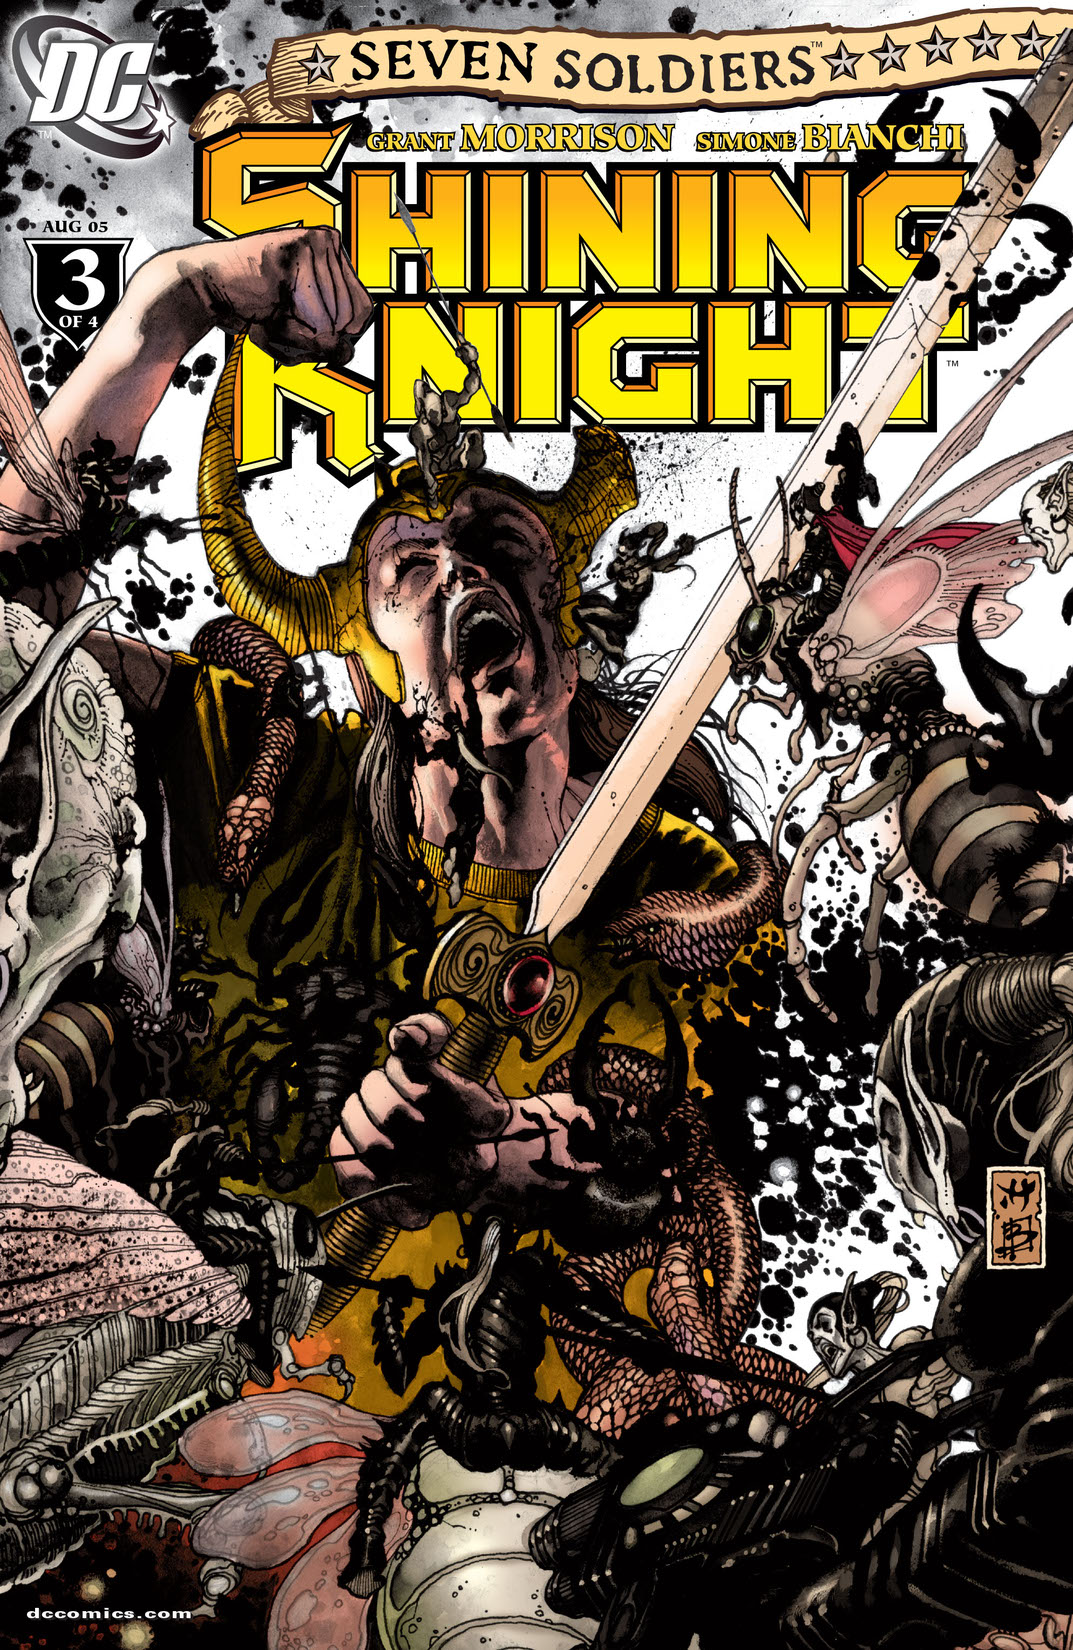 Seven Soldiers: Shining Knight #3 preview images